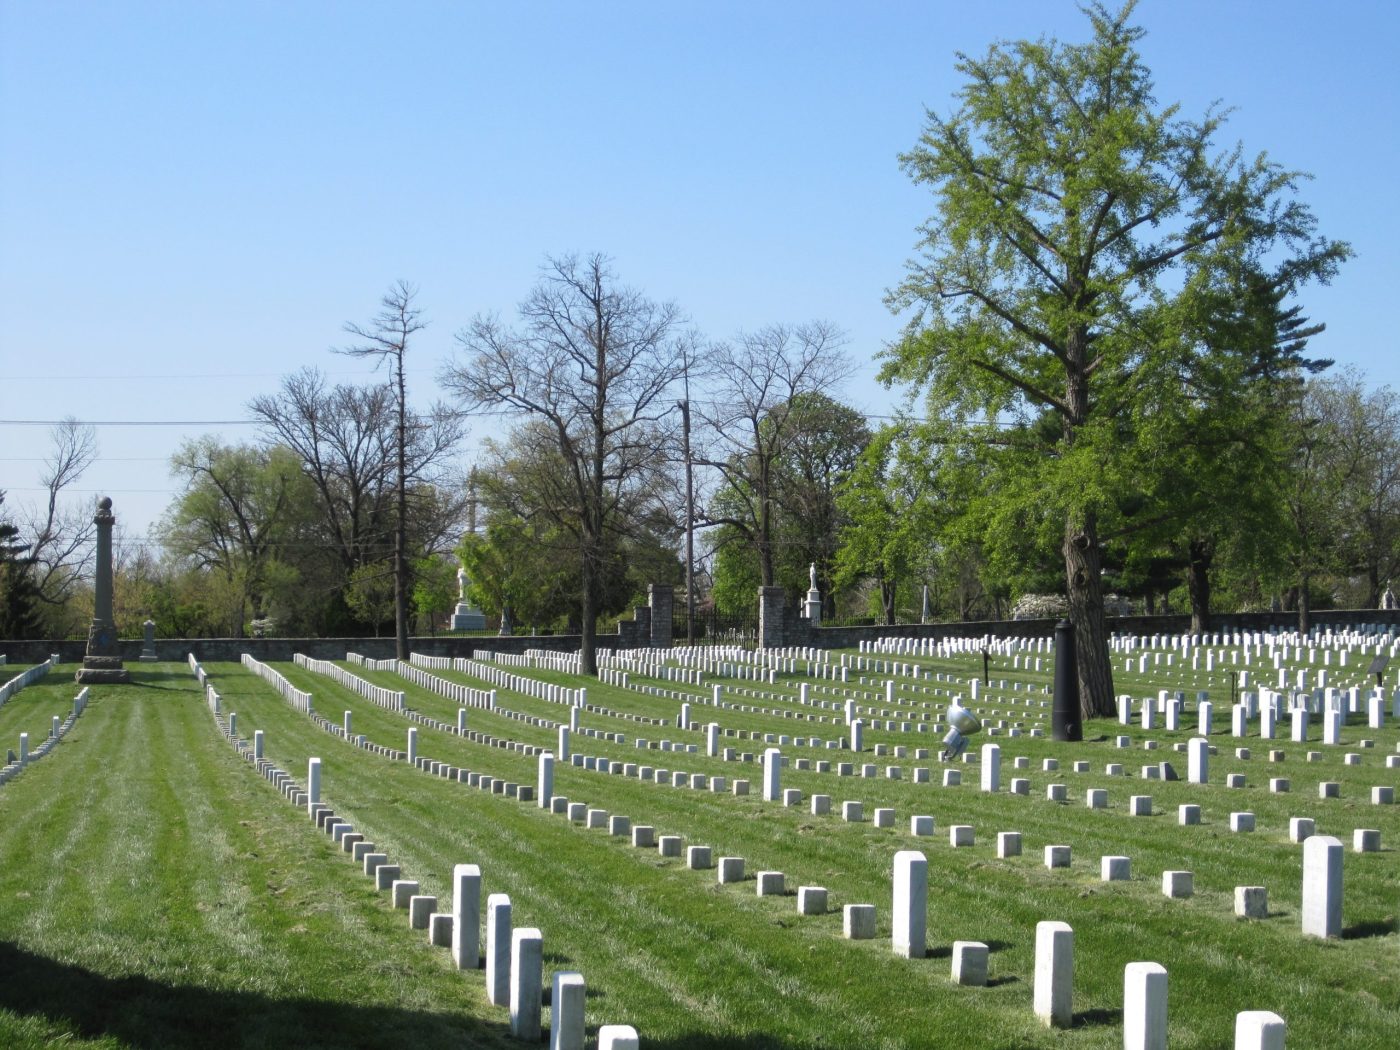 Photo of Winchester National Cemetery, Virginia, July 2011, showing rows of 6x6 markers interspersed with upright headstones. (NCA)